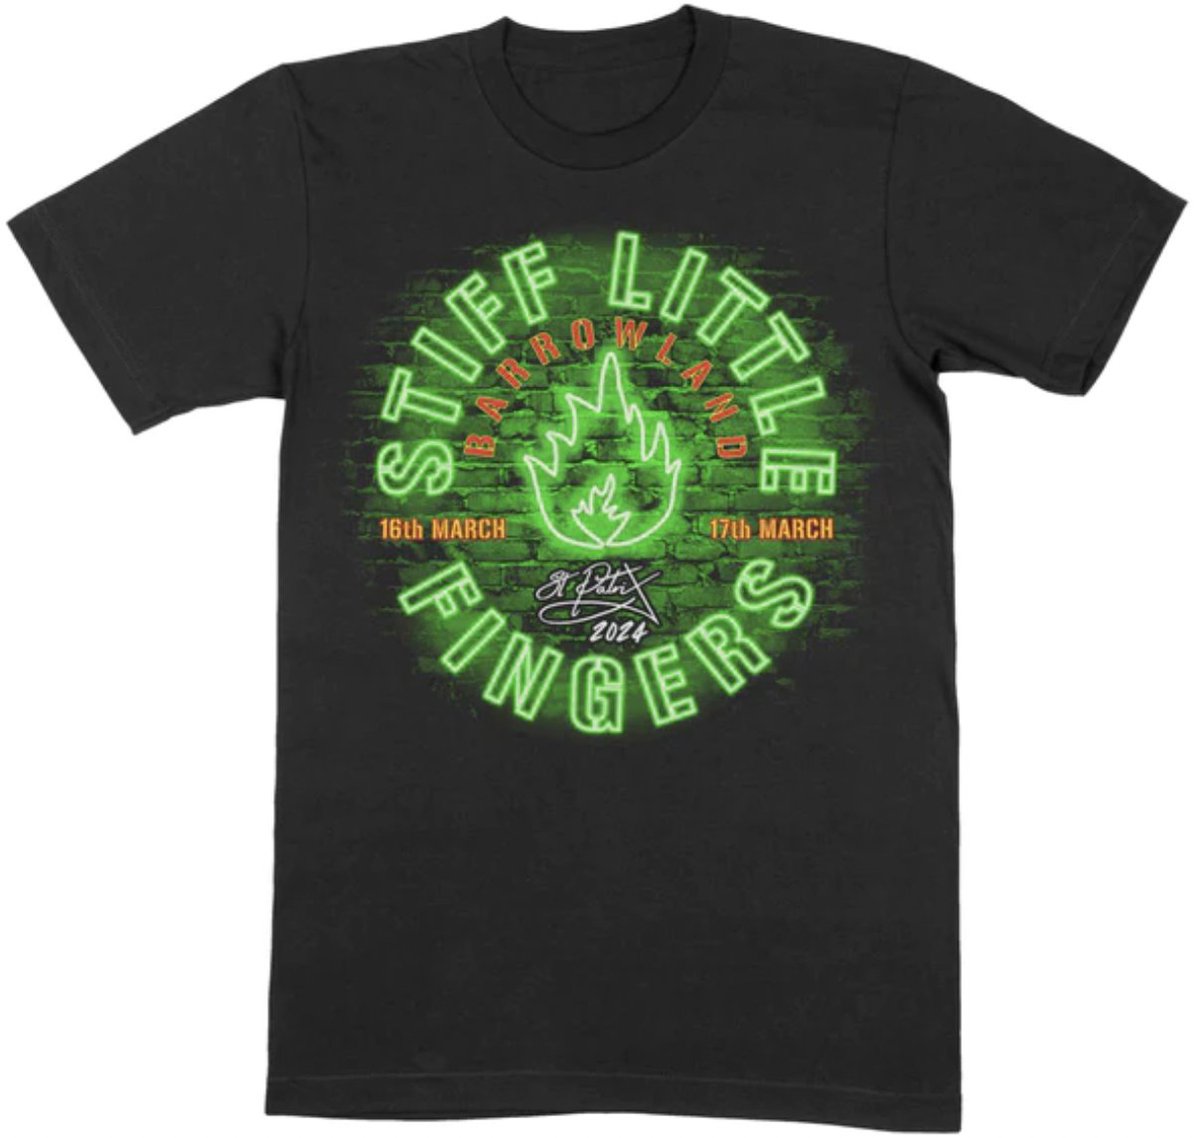 You asked for it! We're doing a quick reprint of our Barras weekend tee. Order by end of day today if you want one! It GLOWS in the dark! stiff-little-fingers-uk.myshopify.com/collections/cu… stiff-little-fingers-uk.myshopify.com